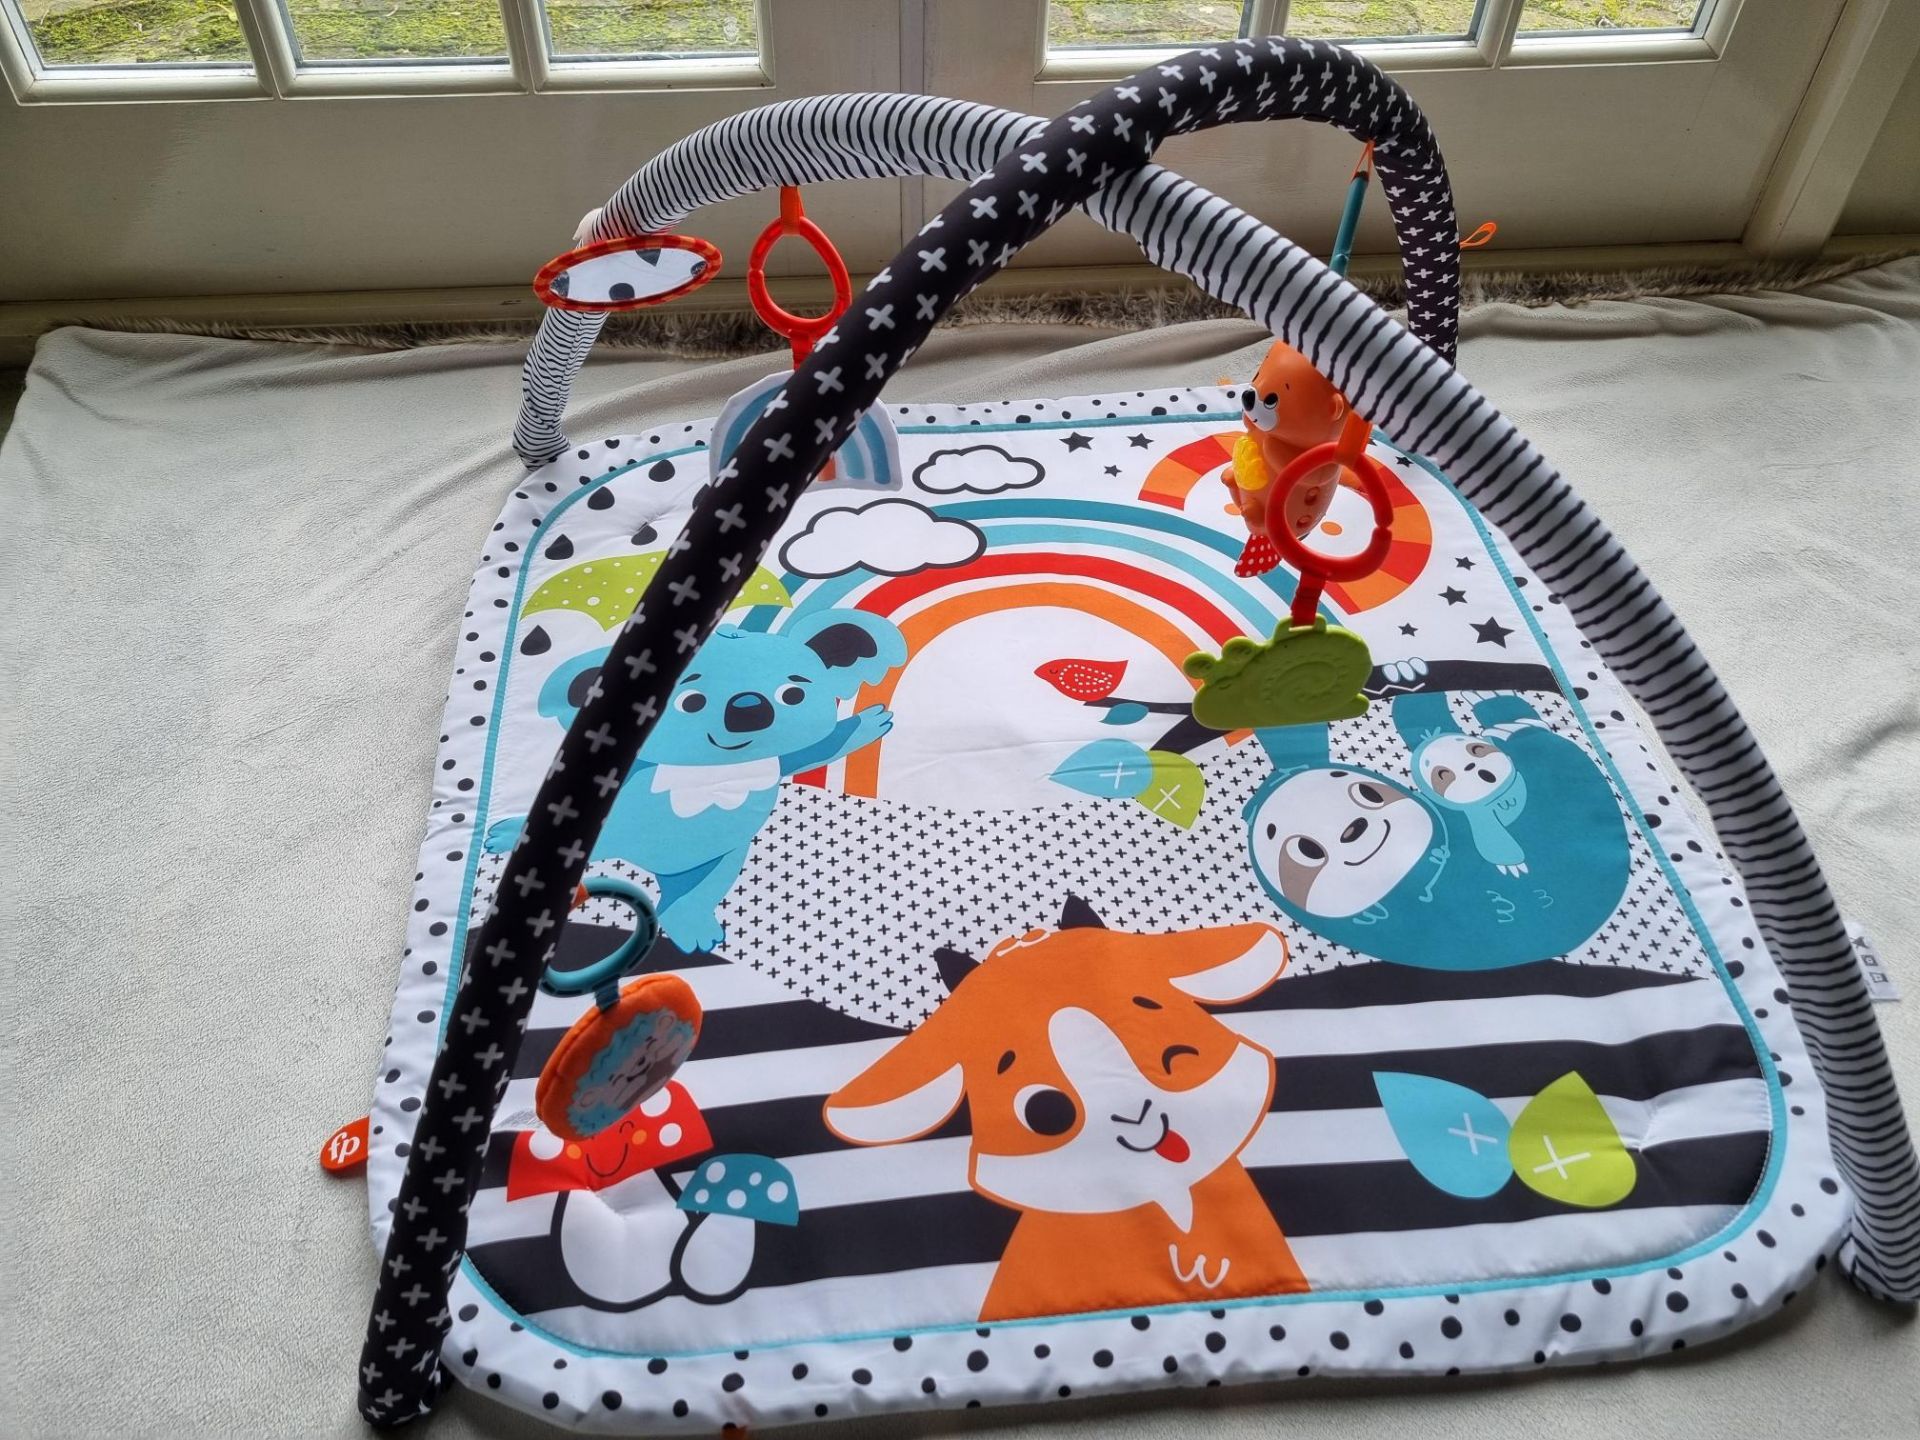 Hauck Disney Pushchair Travel System, Highchair, Tommee Tippee bottle warmer and case, playmat, toys - Image 20 of 24